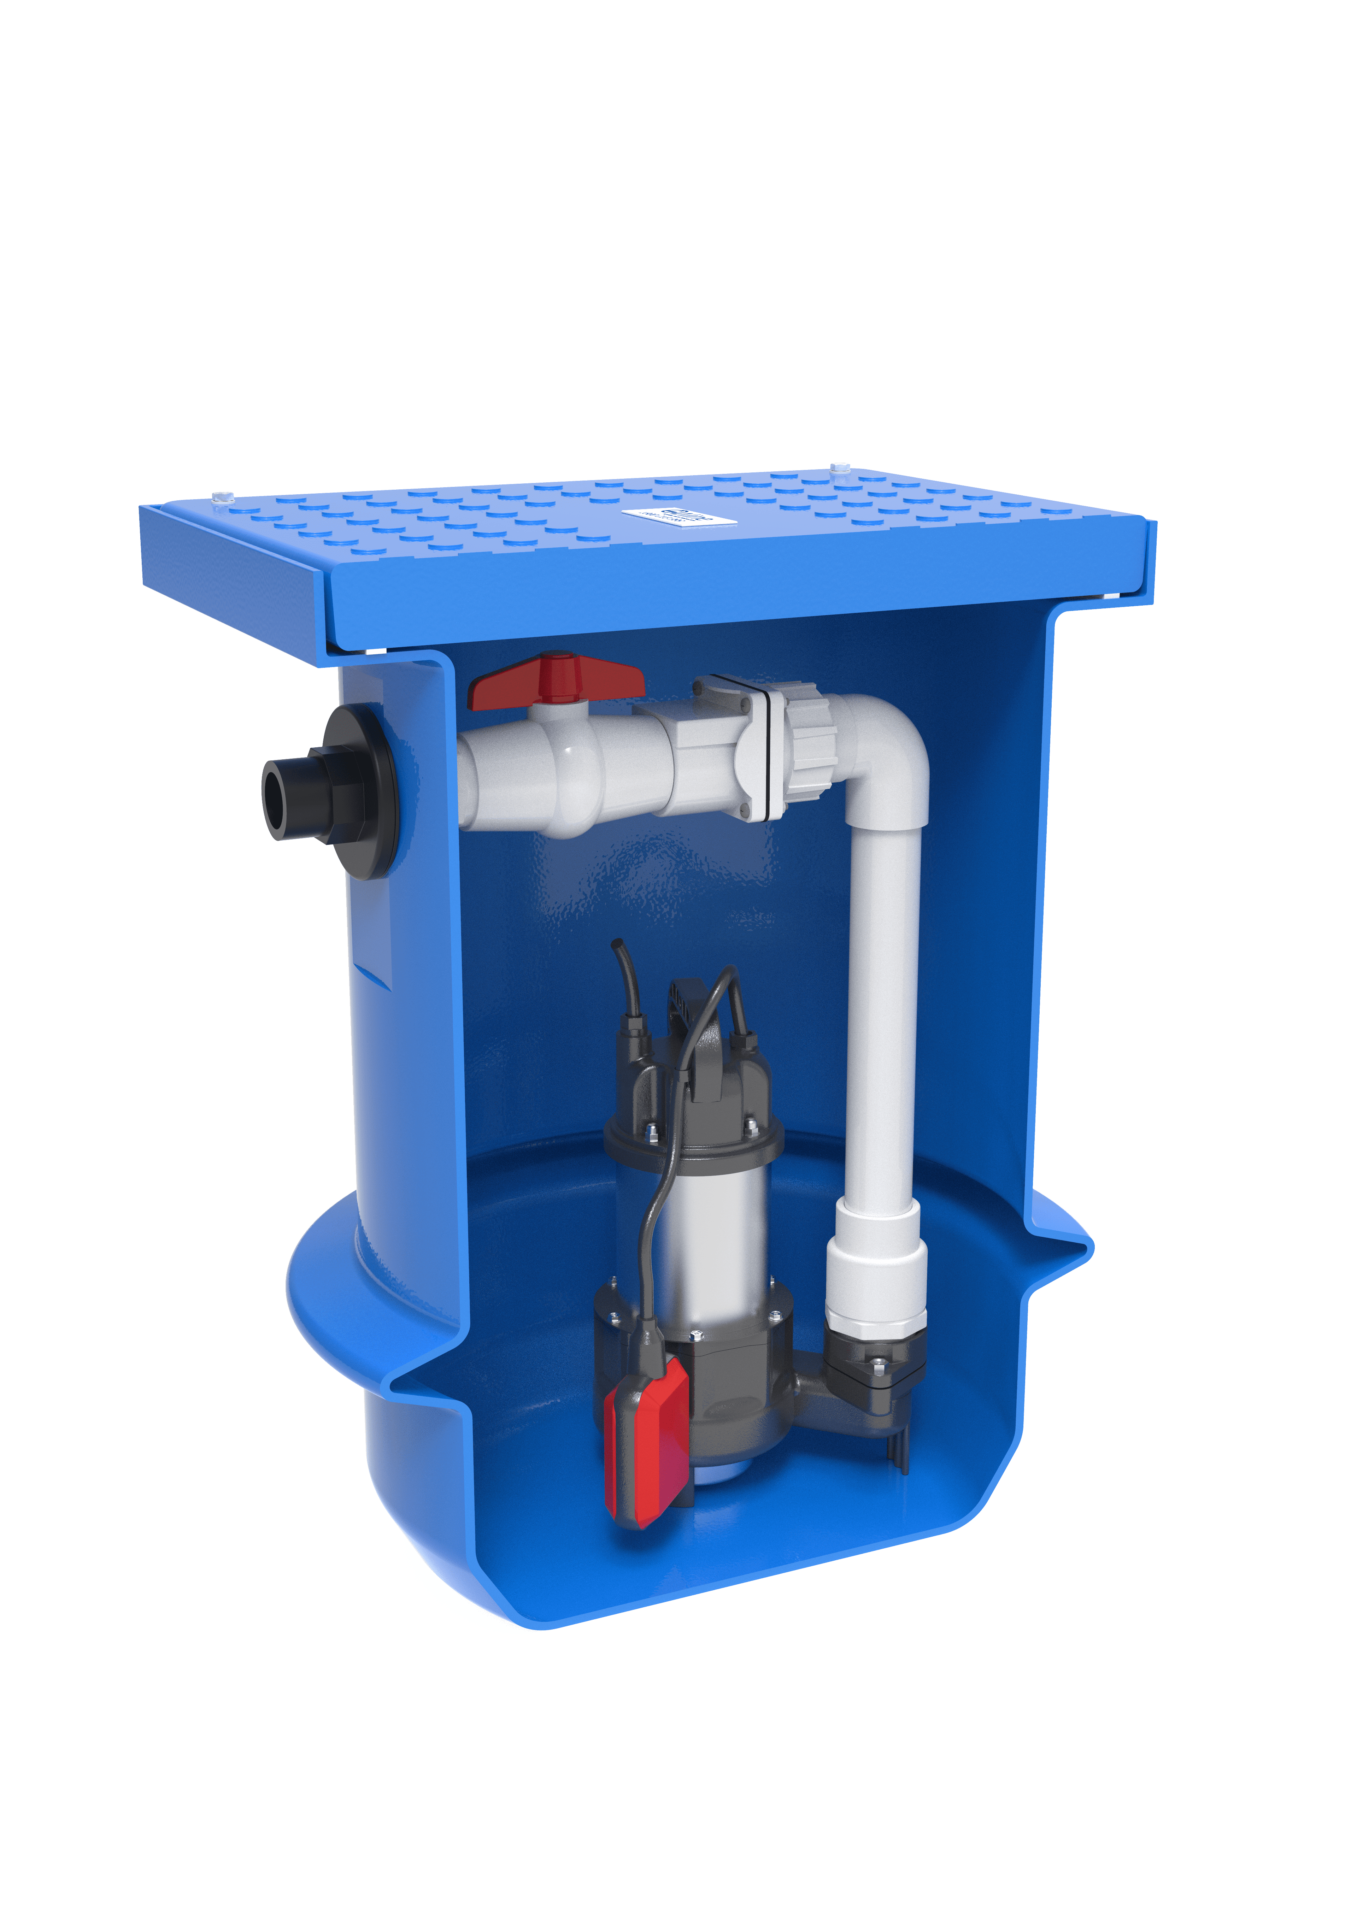 100L Poly sewer pump station tank by Aline Pumps